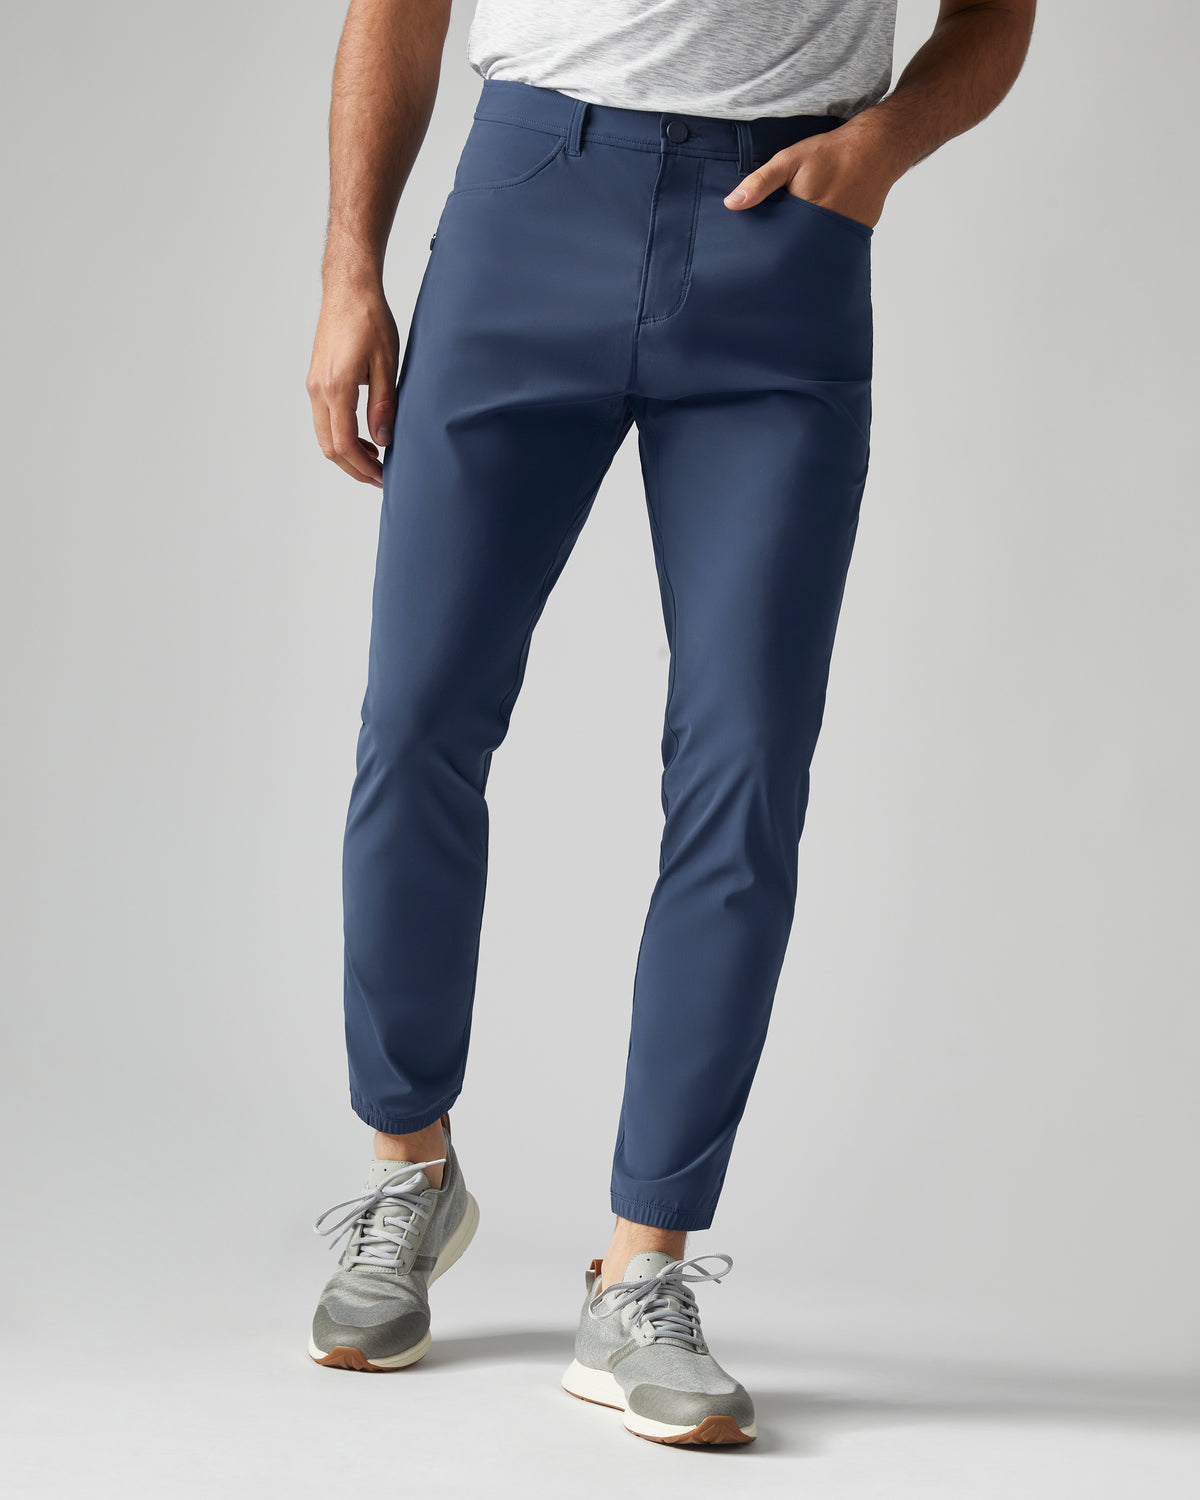 Brand New: Commuter Jogger  The all-new Commuter Jogger has